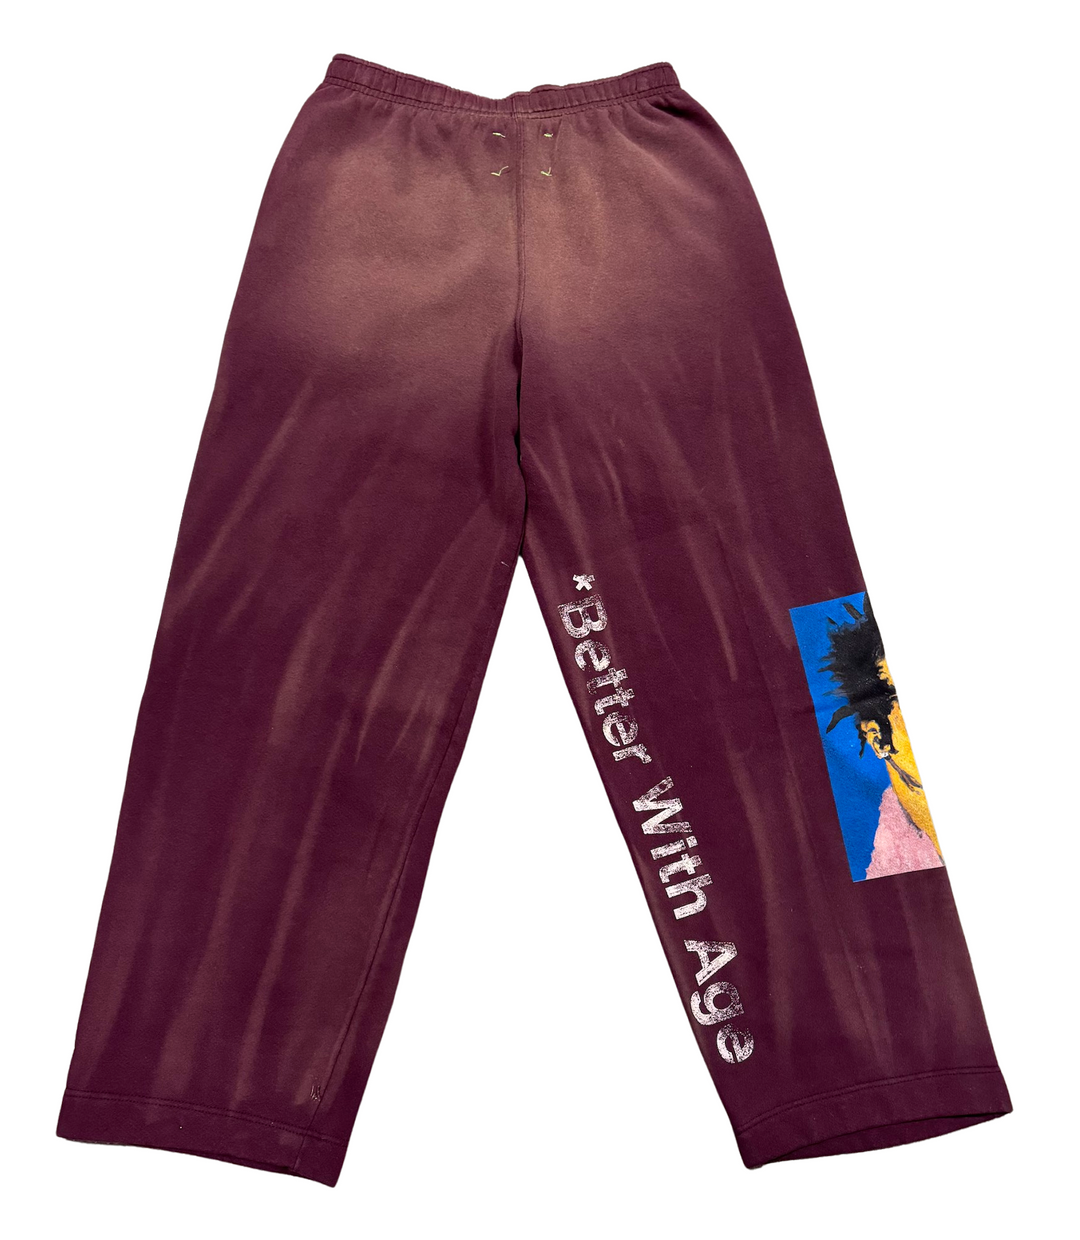 *Better With Age 'Psychodelic' Burgundy Sweatpants